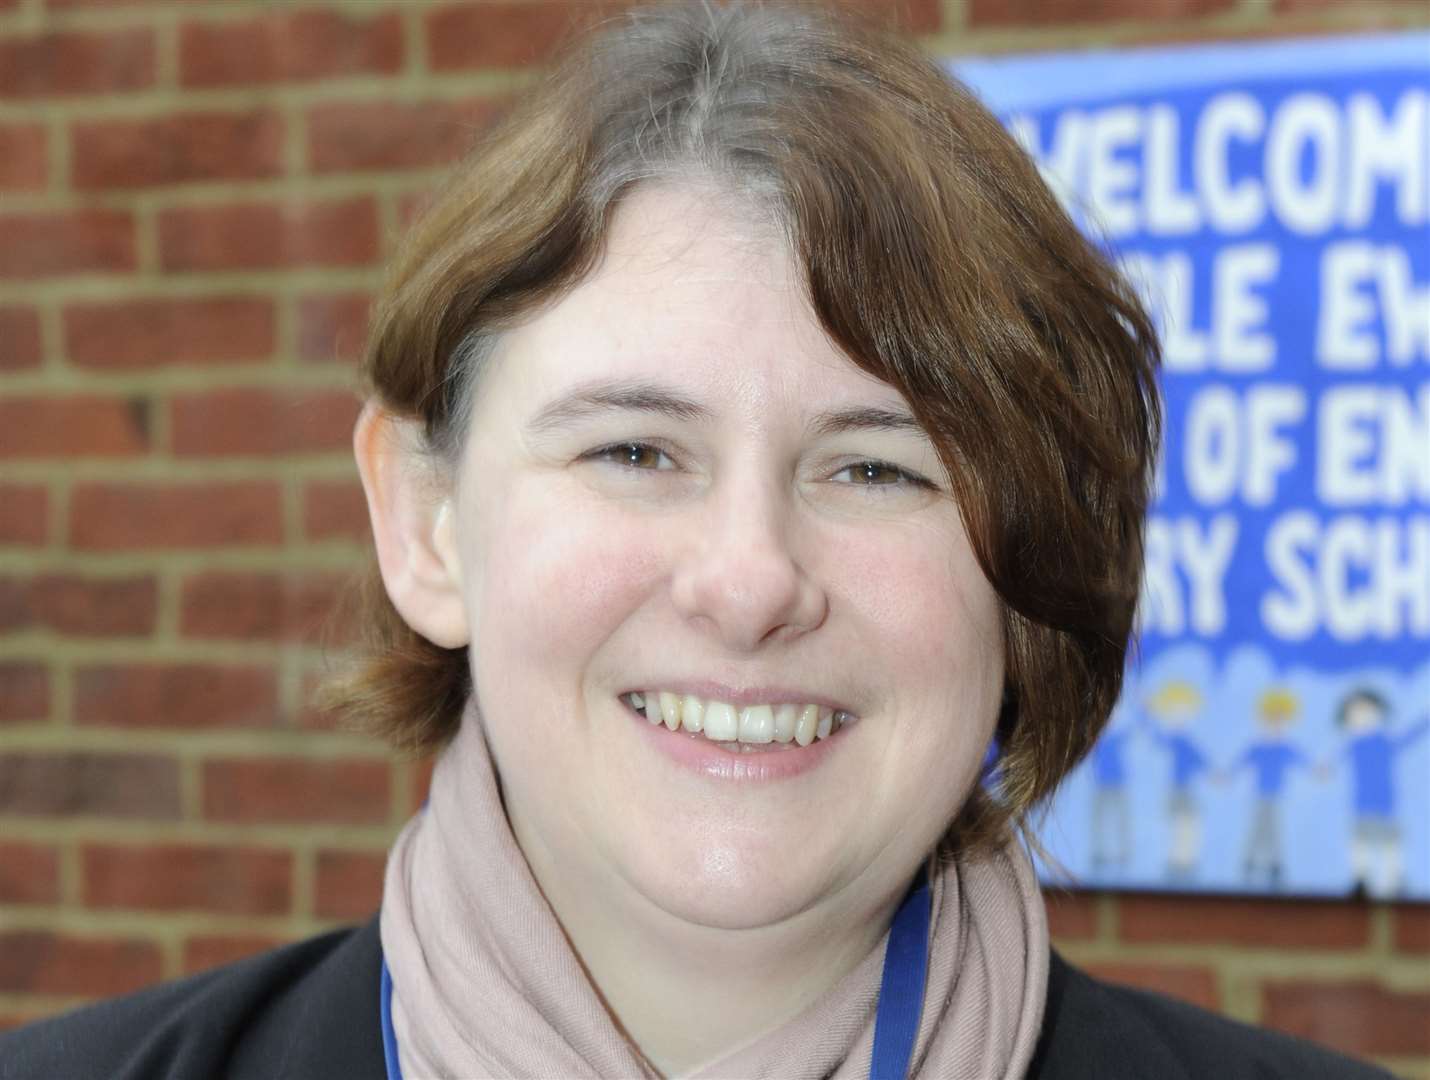 Temple Ewell head teacher Angela Matthews says the issues raised by Ofsted have been addressed